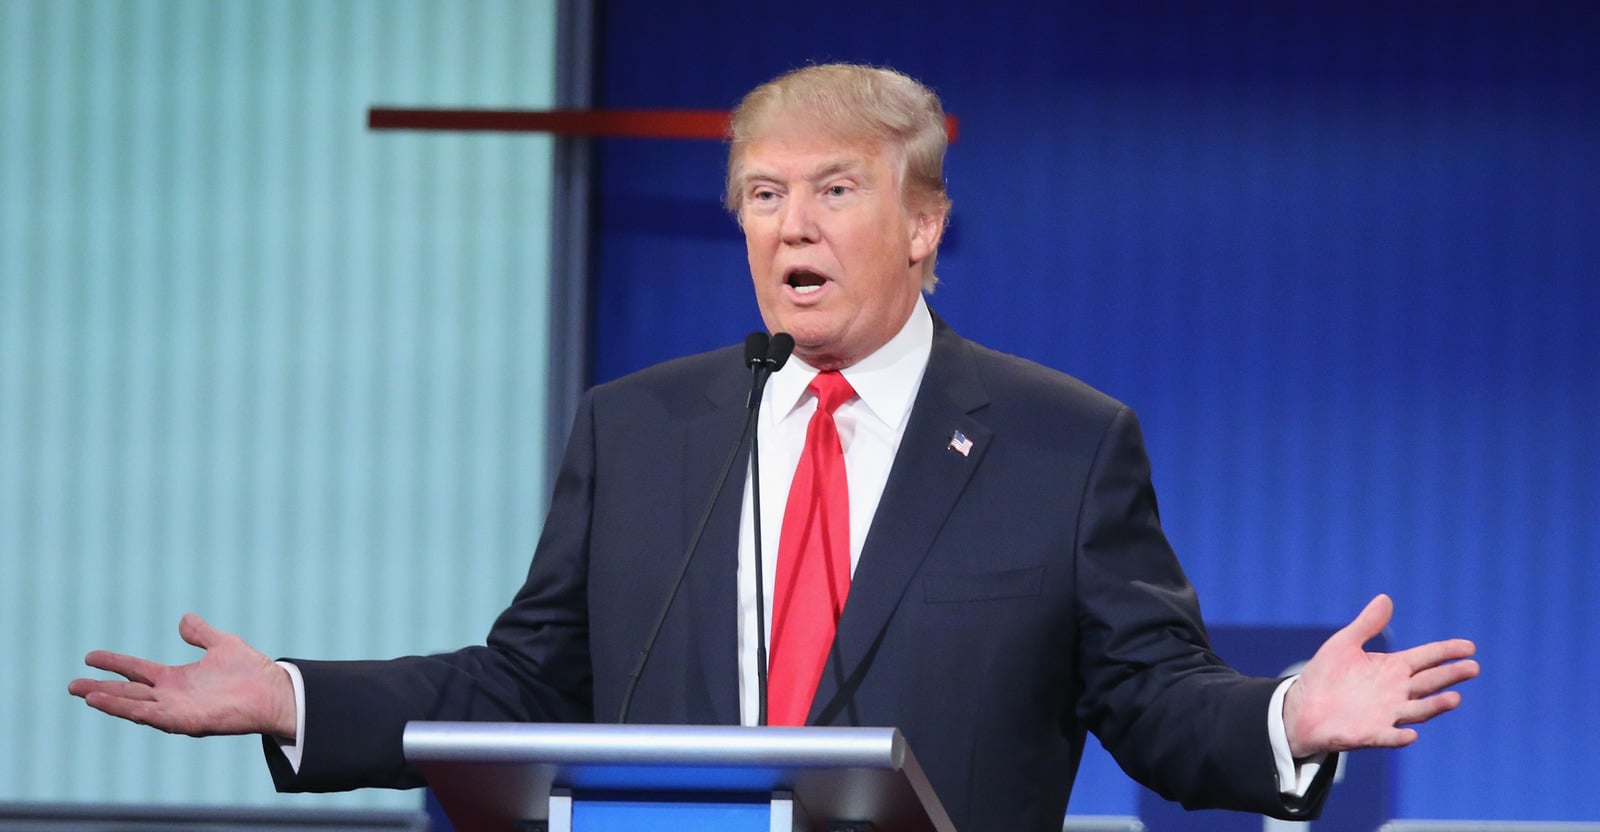 Fox News Makes an Embarrassing Move Toward Donald Trump on Eve of First Republican Primary Debate